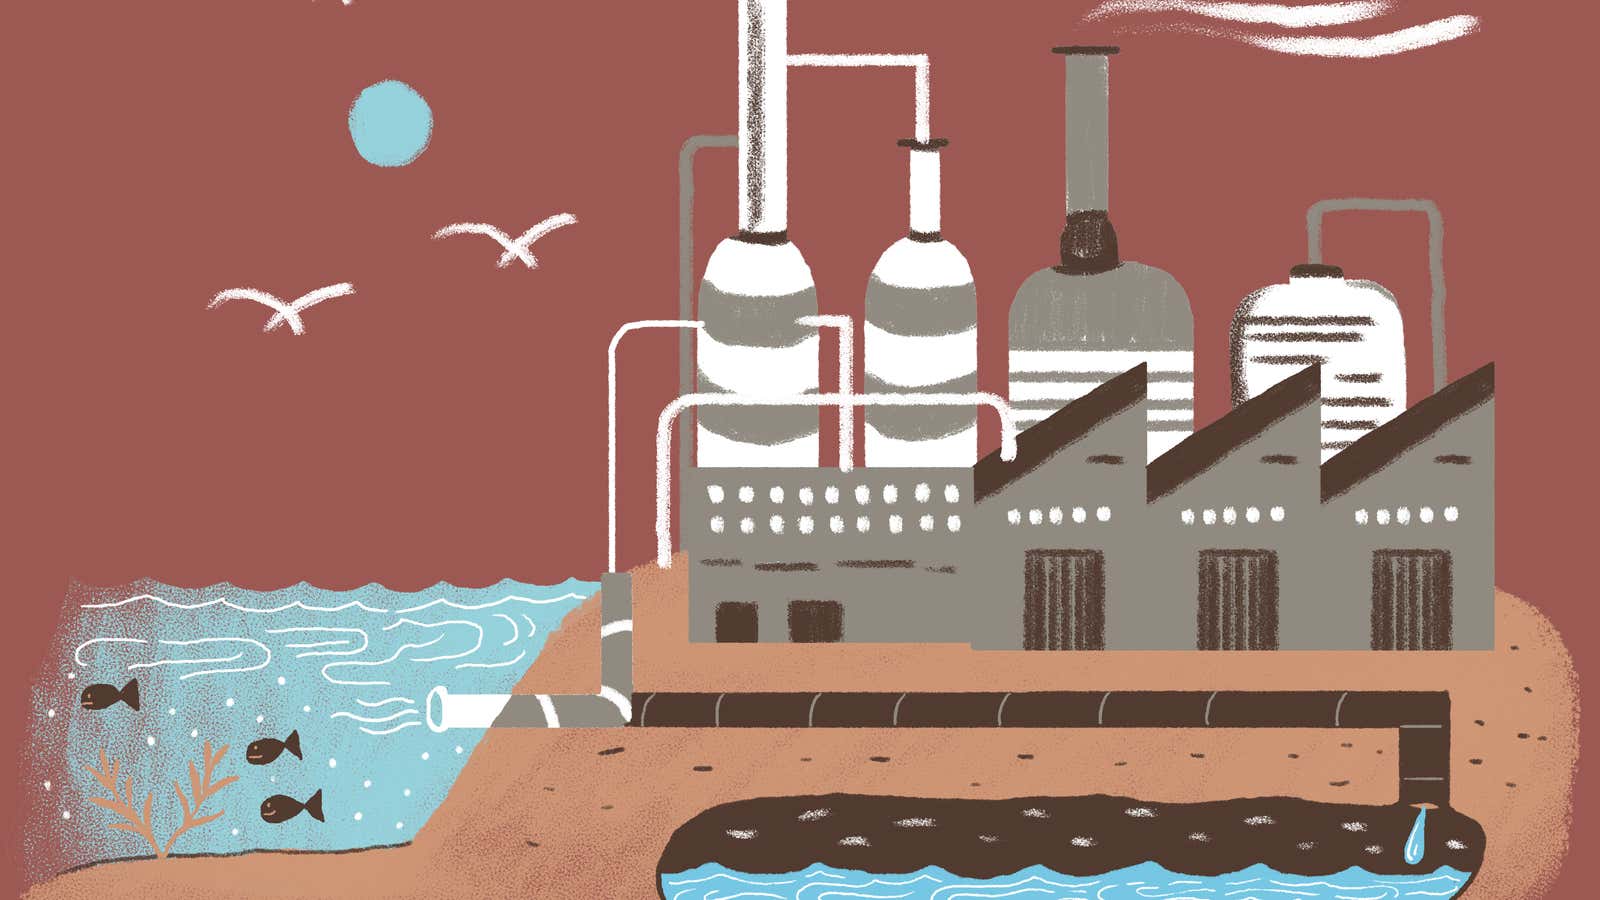 Illustration of a desalination plant in Texas